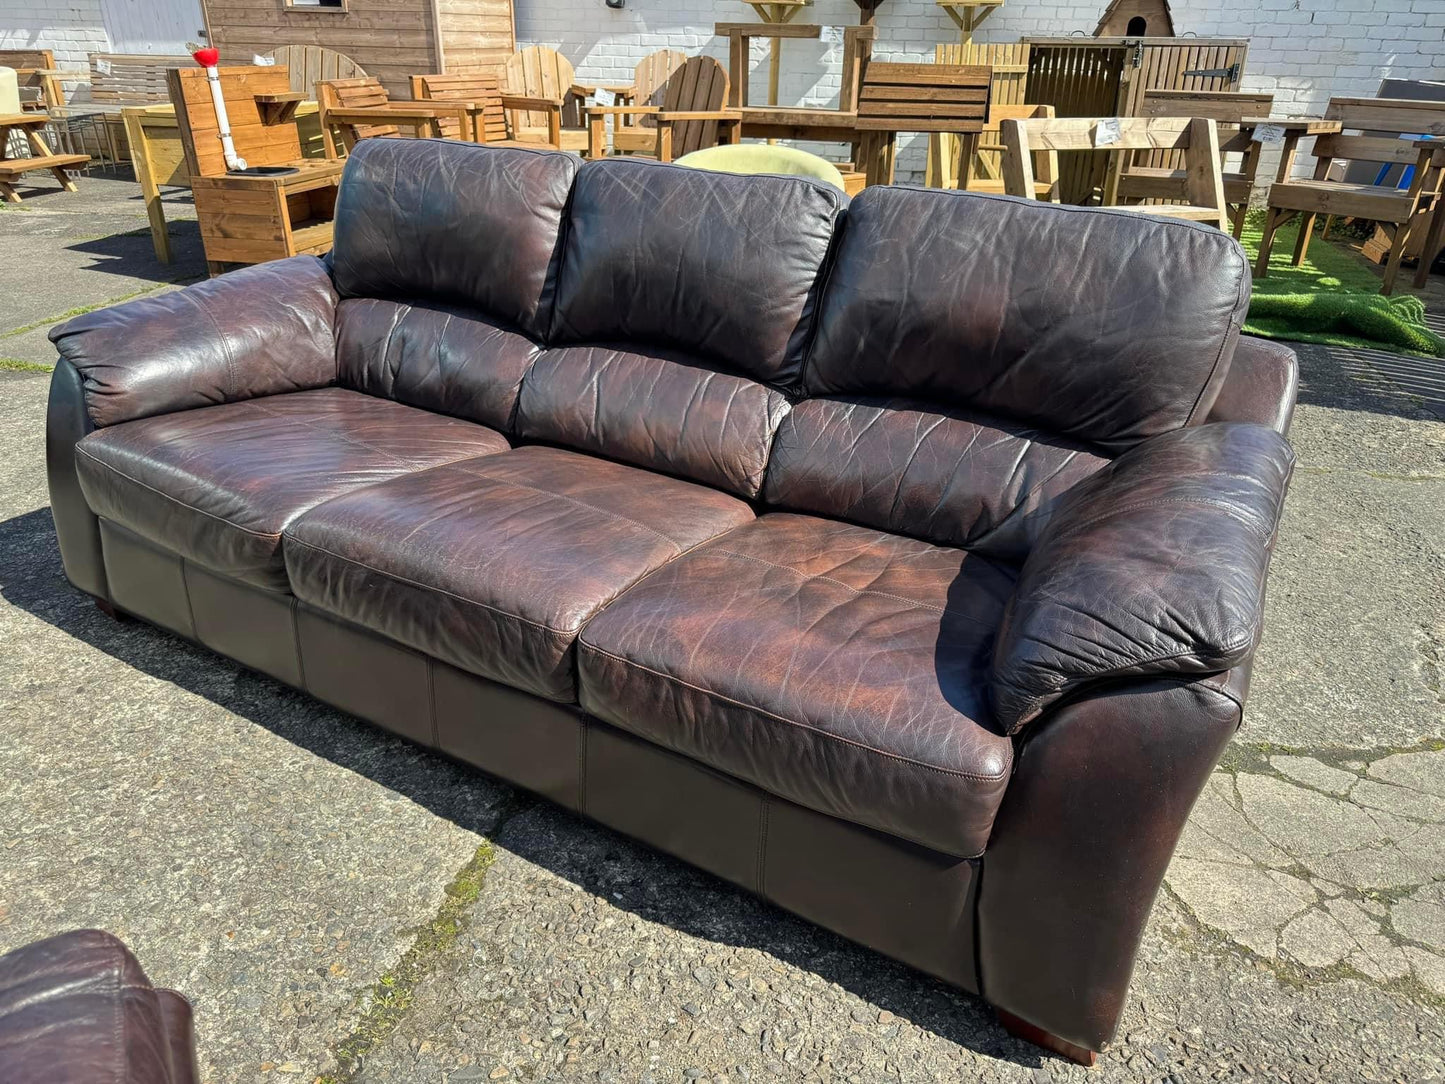 Brown leather 3 seater and 2 chairs